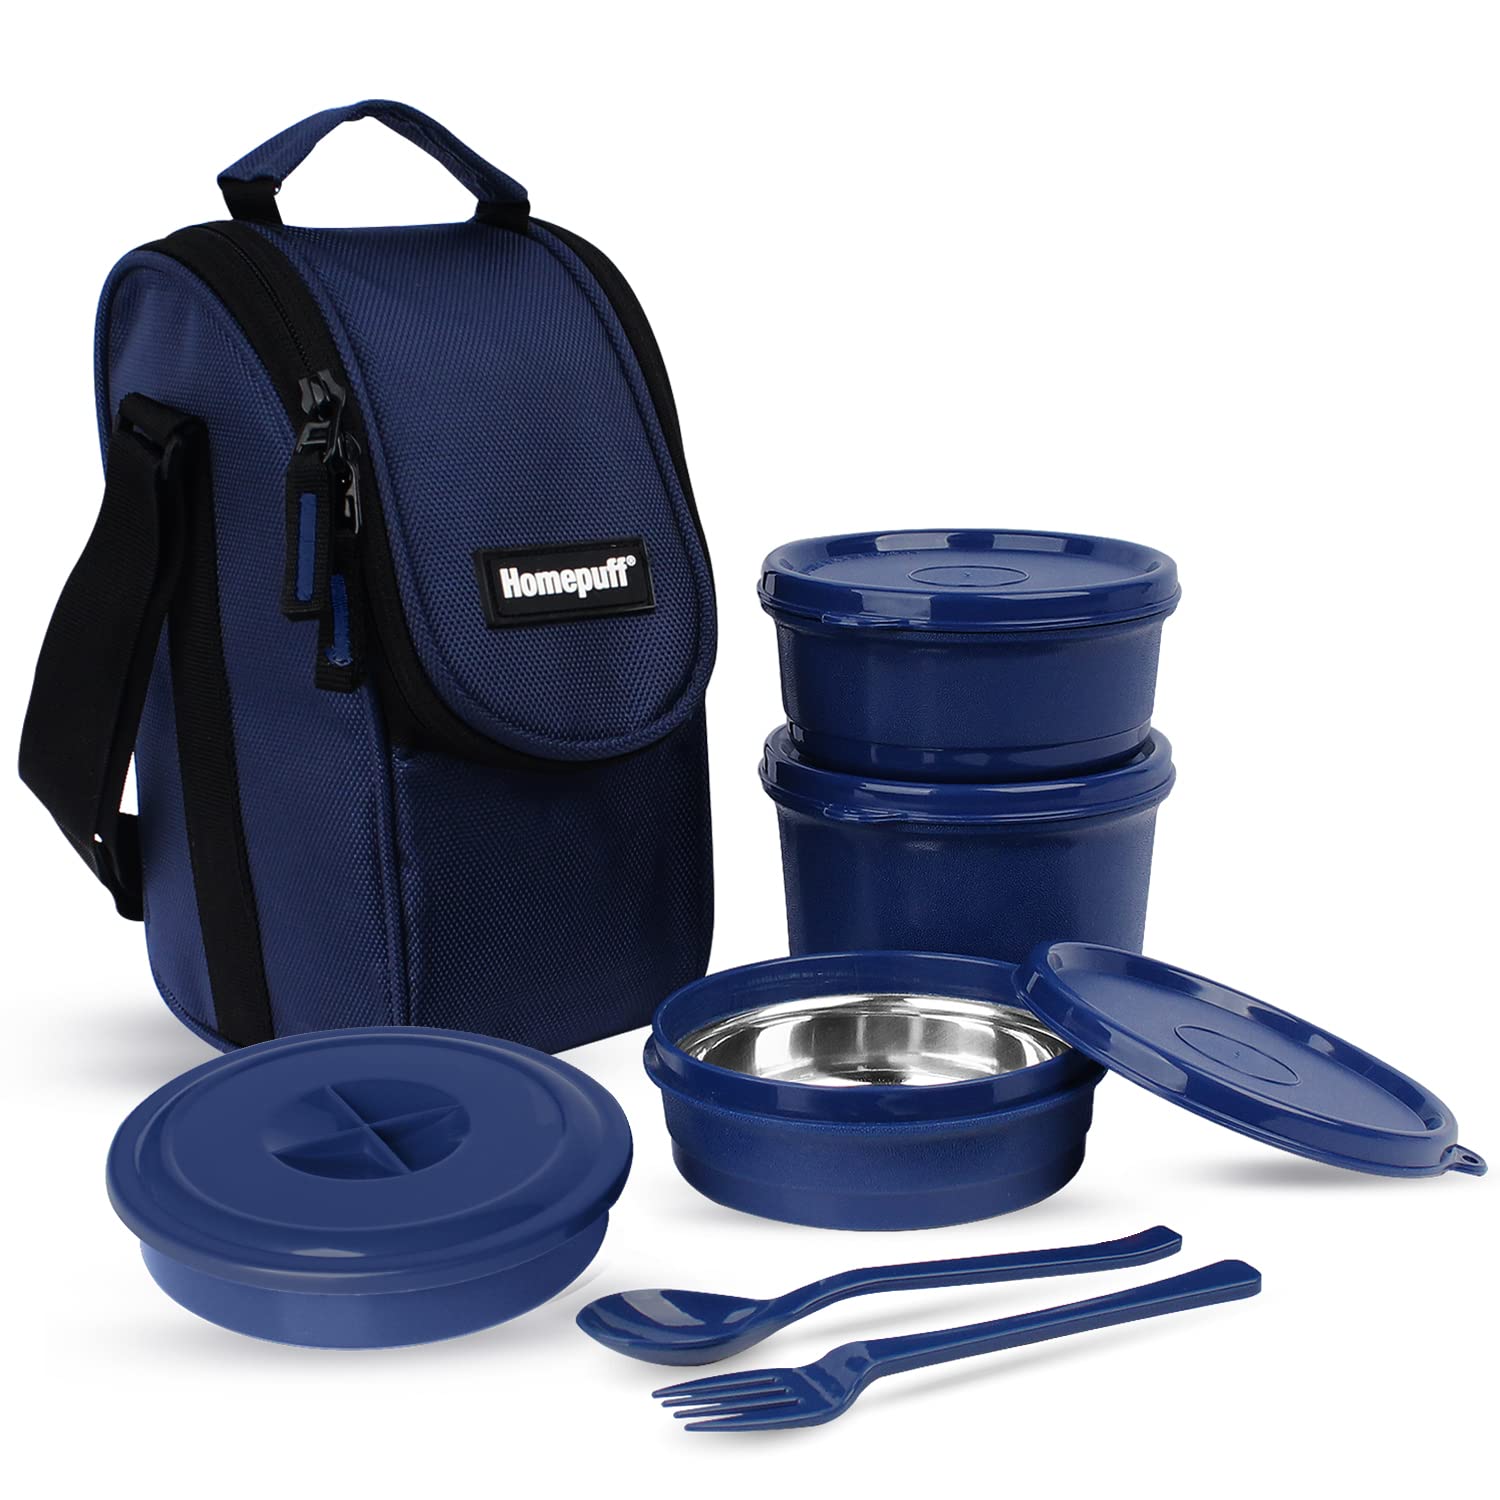 Home Puff Set of 4 Stainless Steel Insulated Lunch Boxes for Office Men & Women, Airtight & Leak Proof Tiffin Box for School, Free Lunch Bag, Easy Clean, 1500ml, Blue, Made in India with Warranty